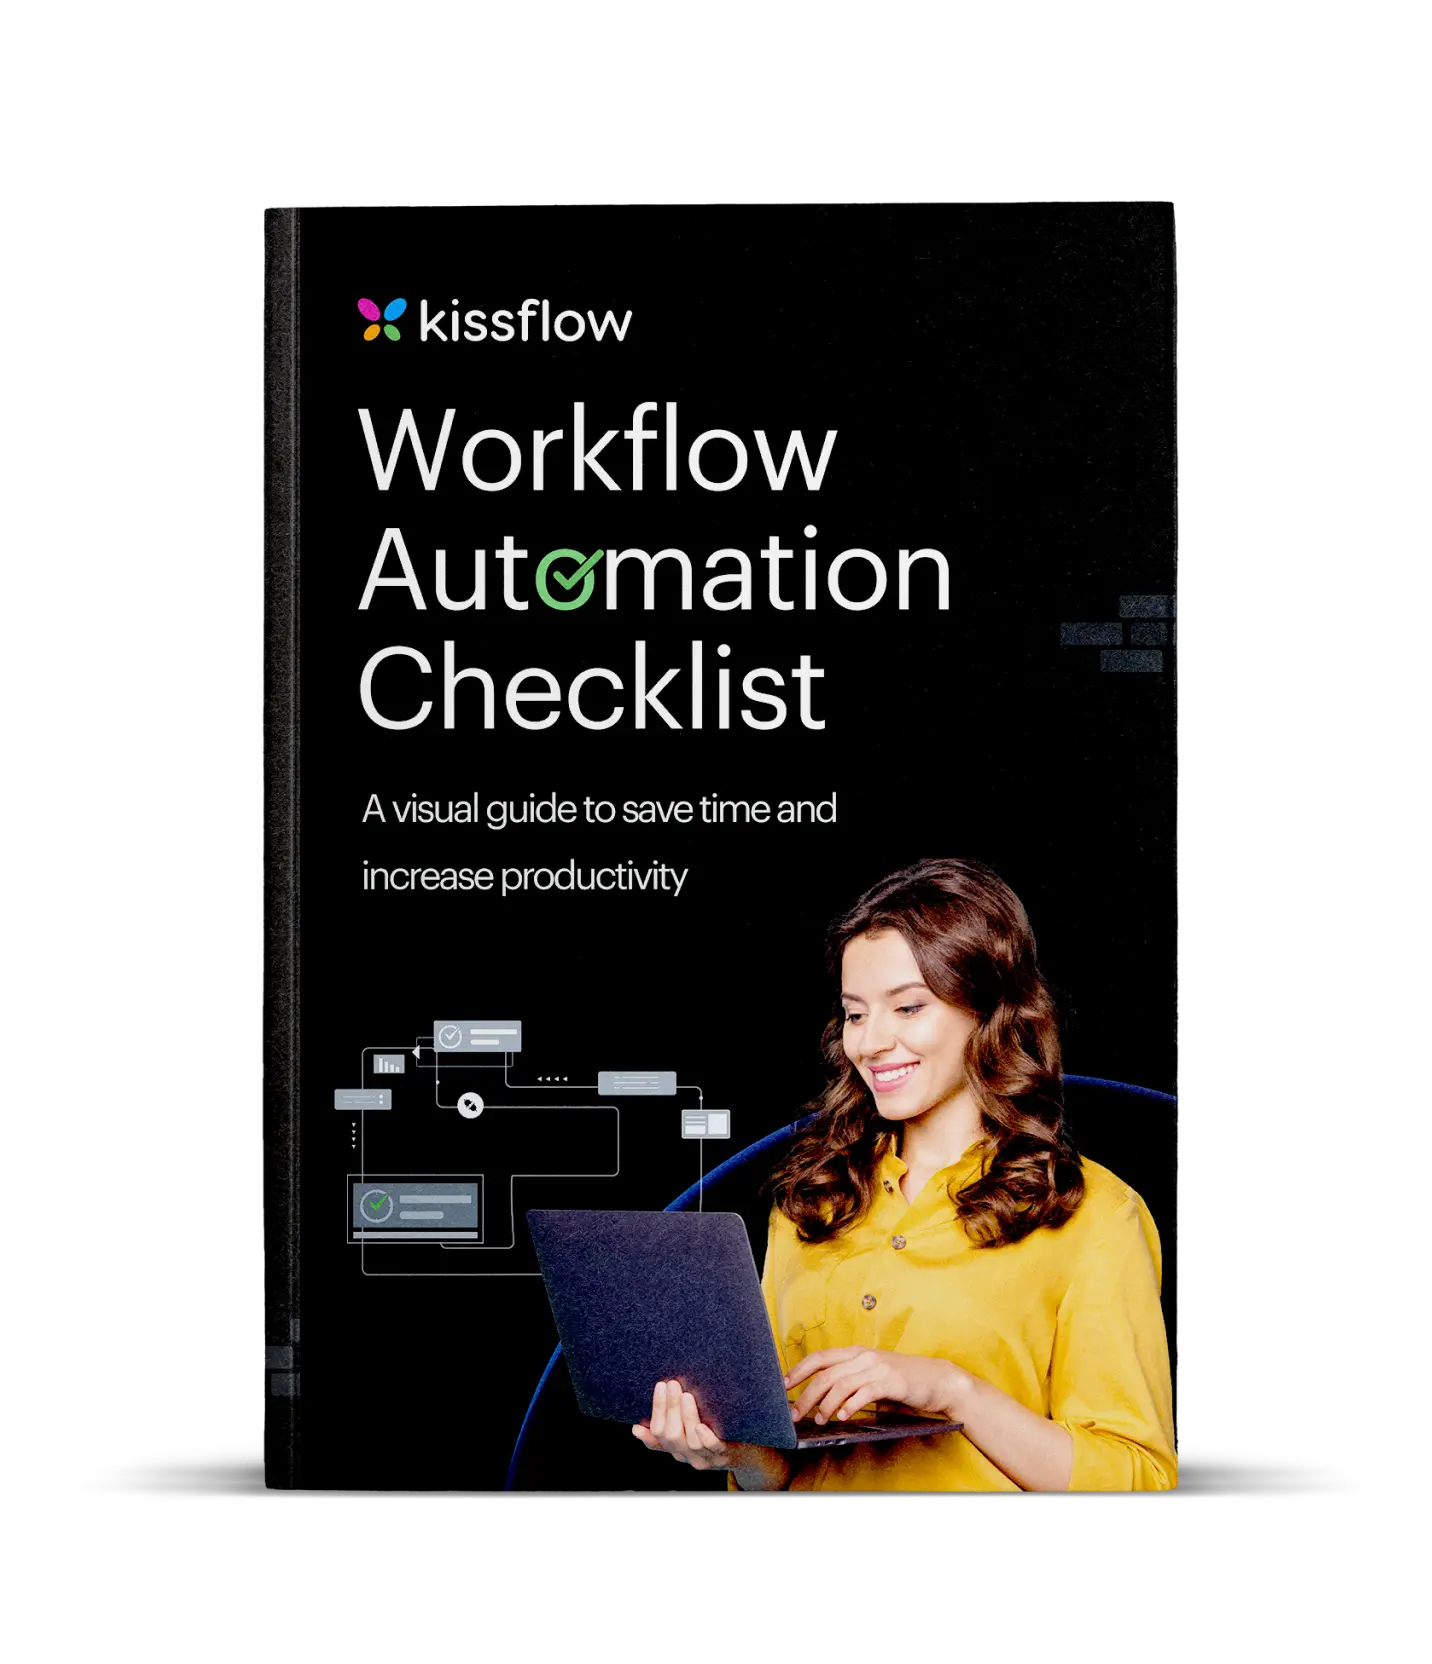 Workflow Automation Checklist: The Complete Guide for Business Owners